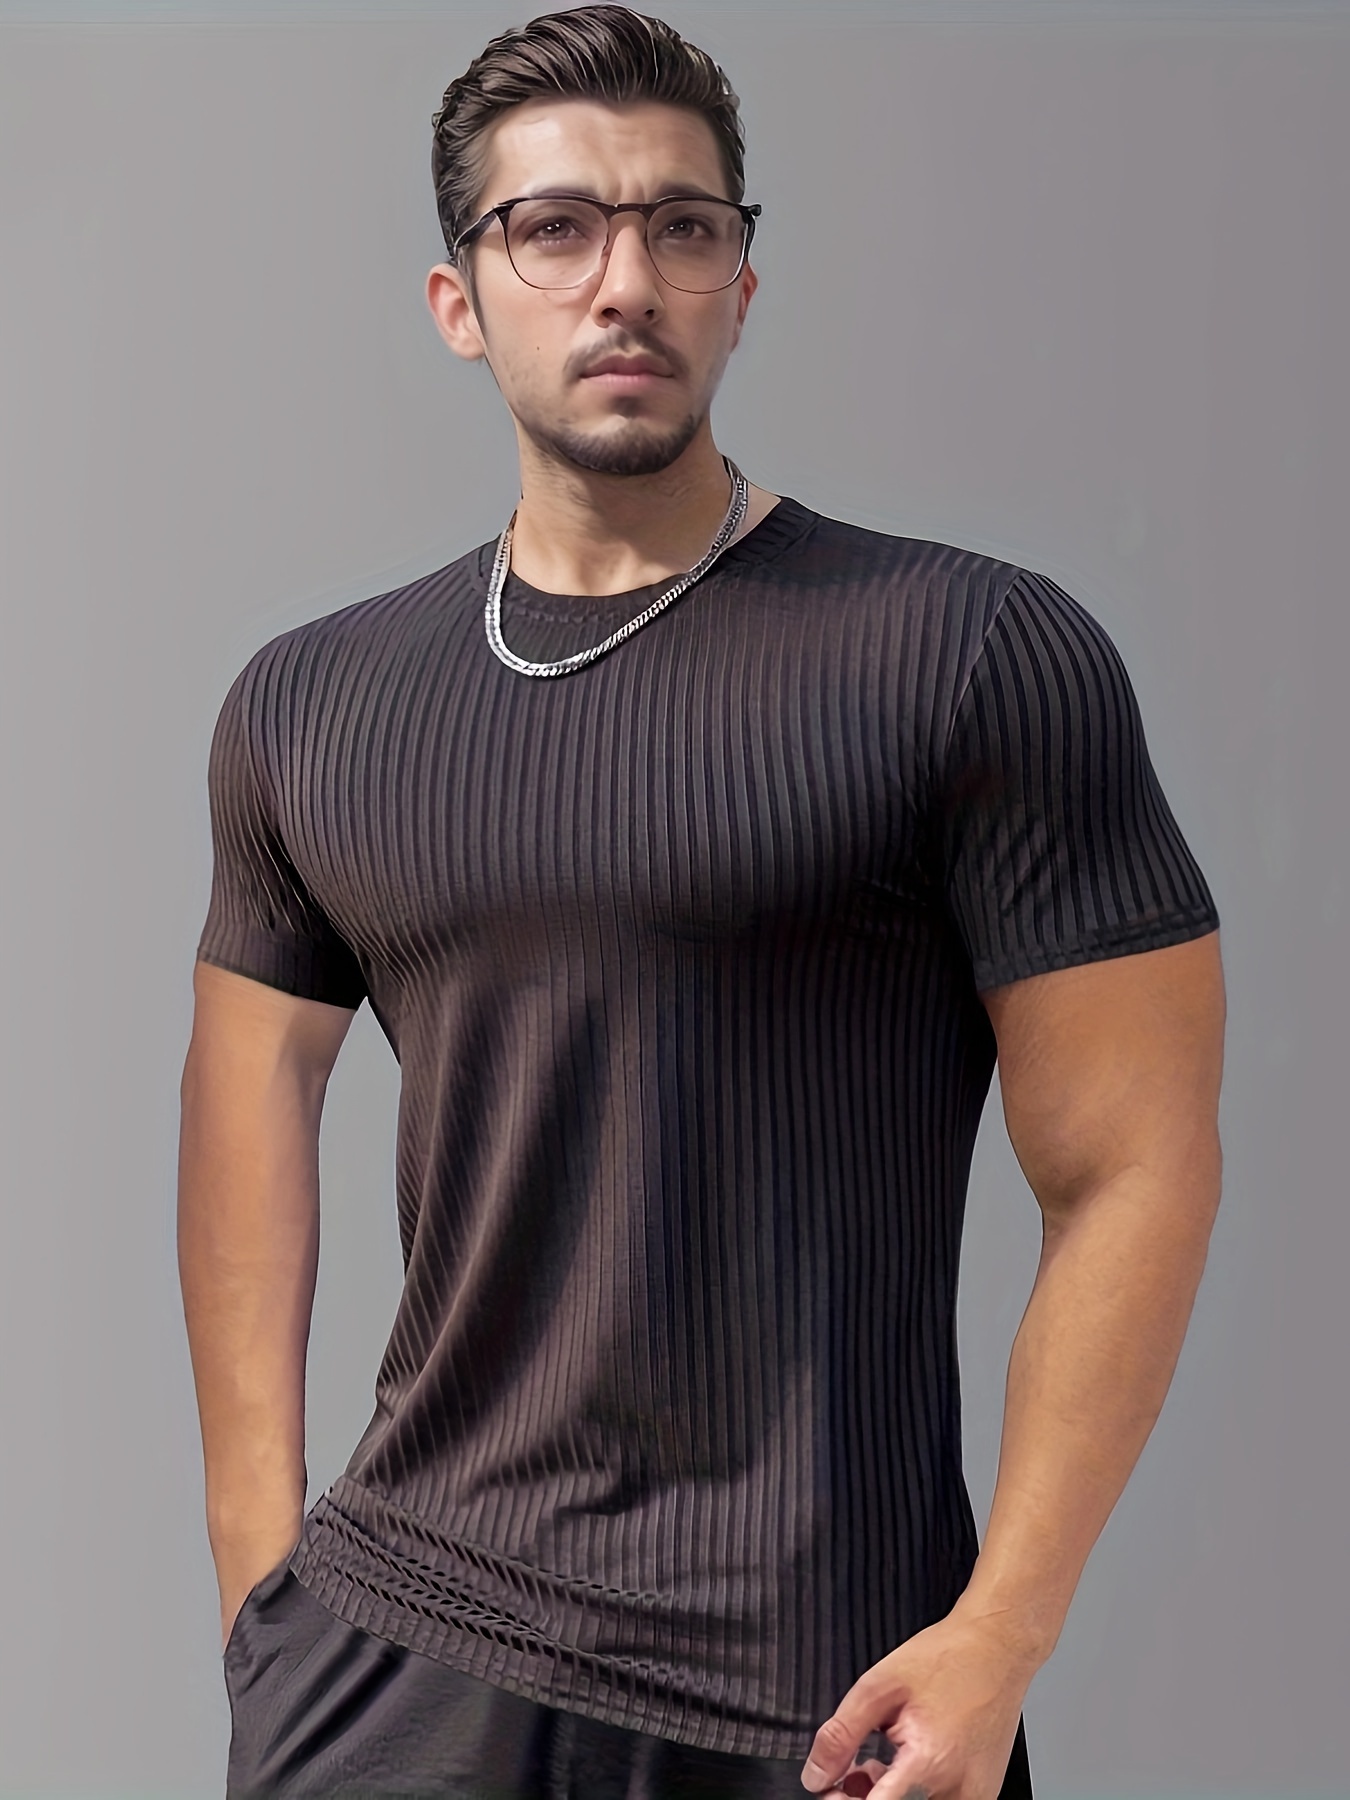 Men's Gym and Bodybuilding Breathable T shirt - Men's Fitness